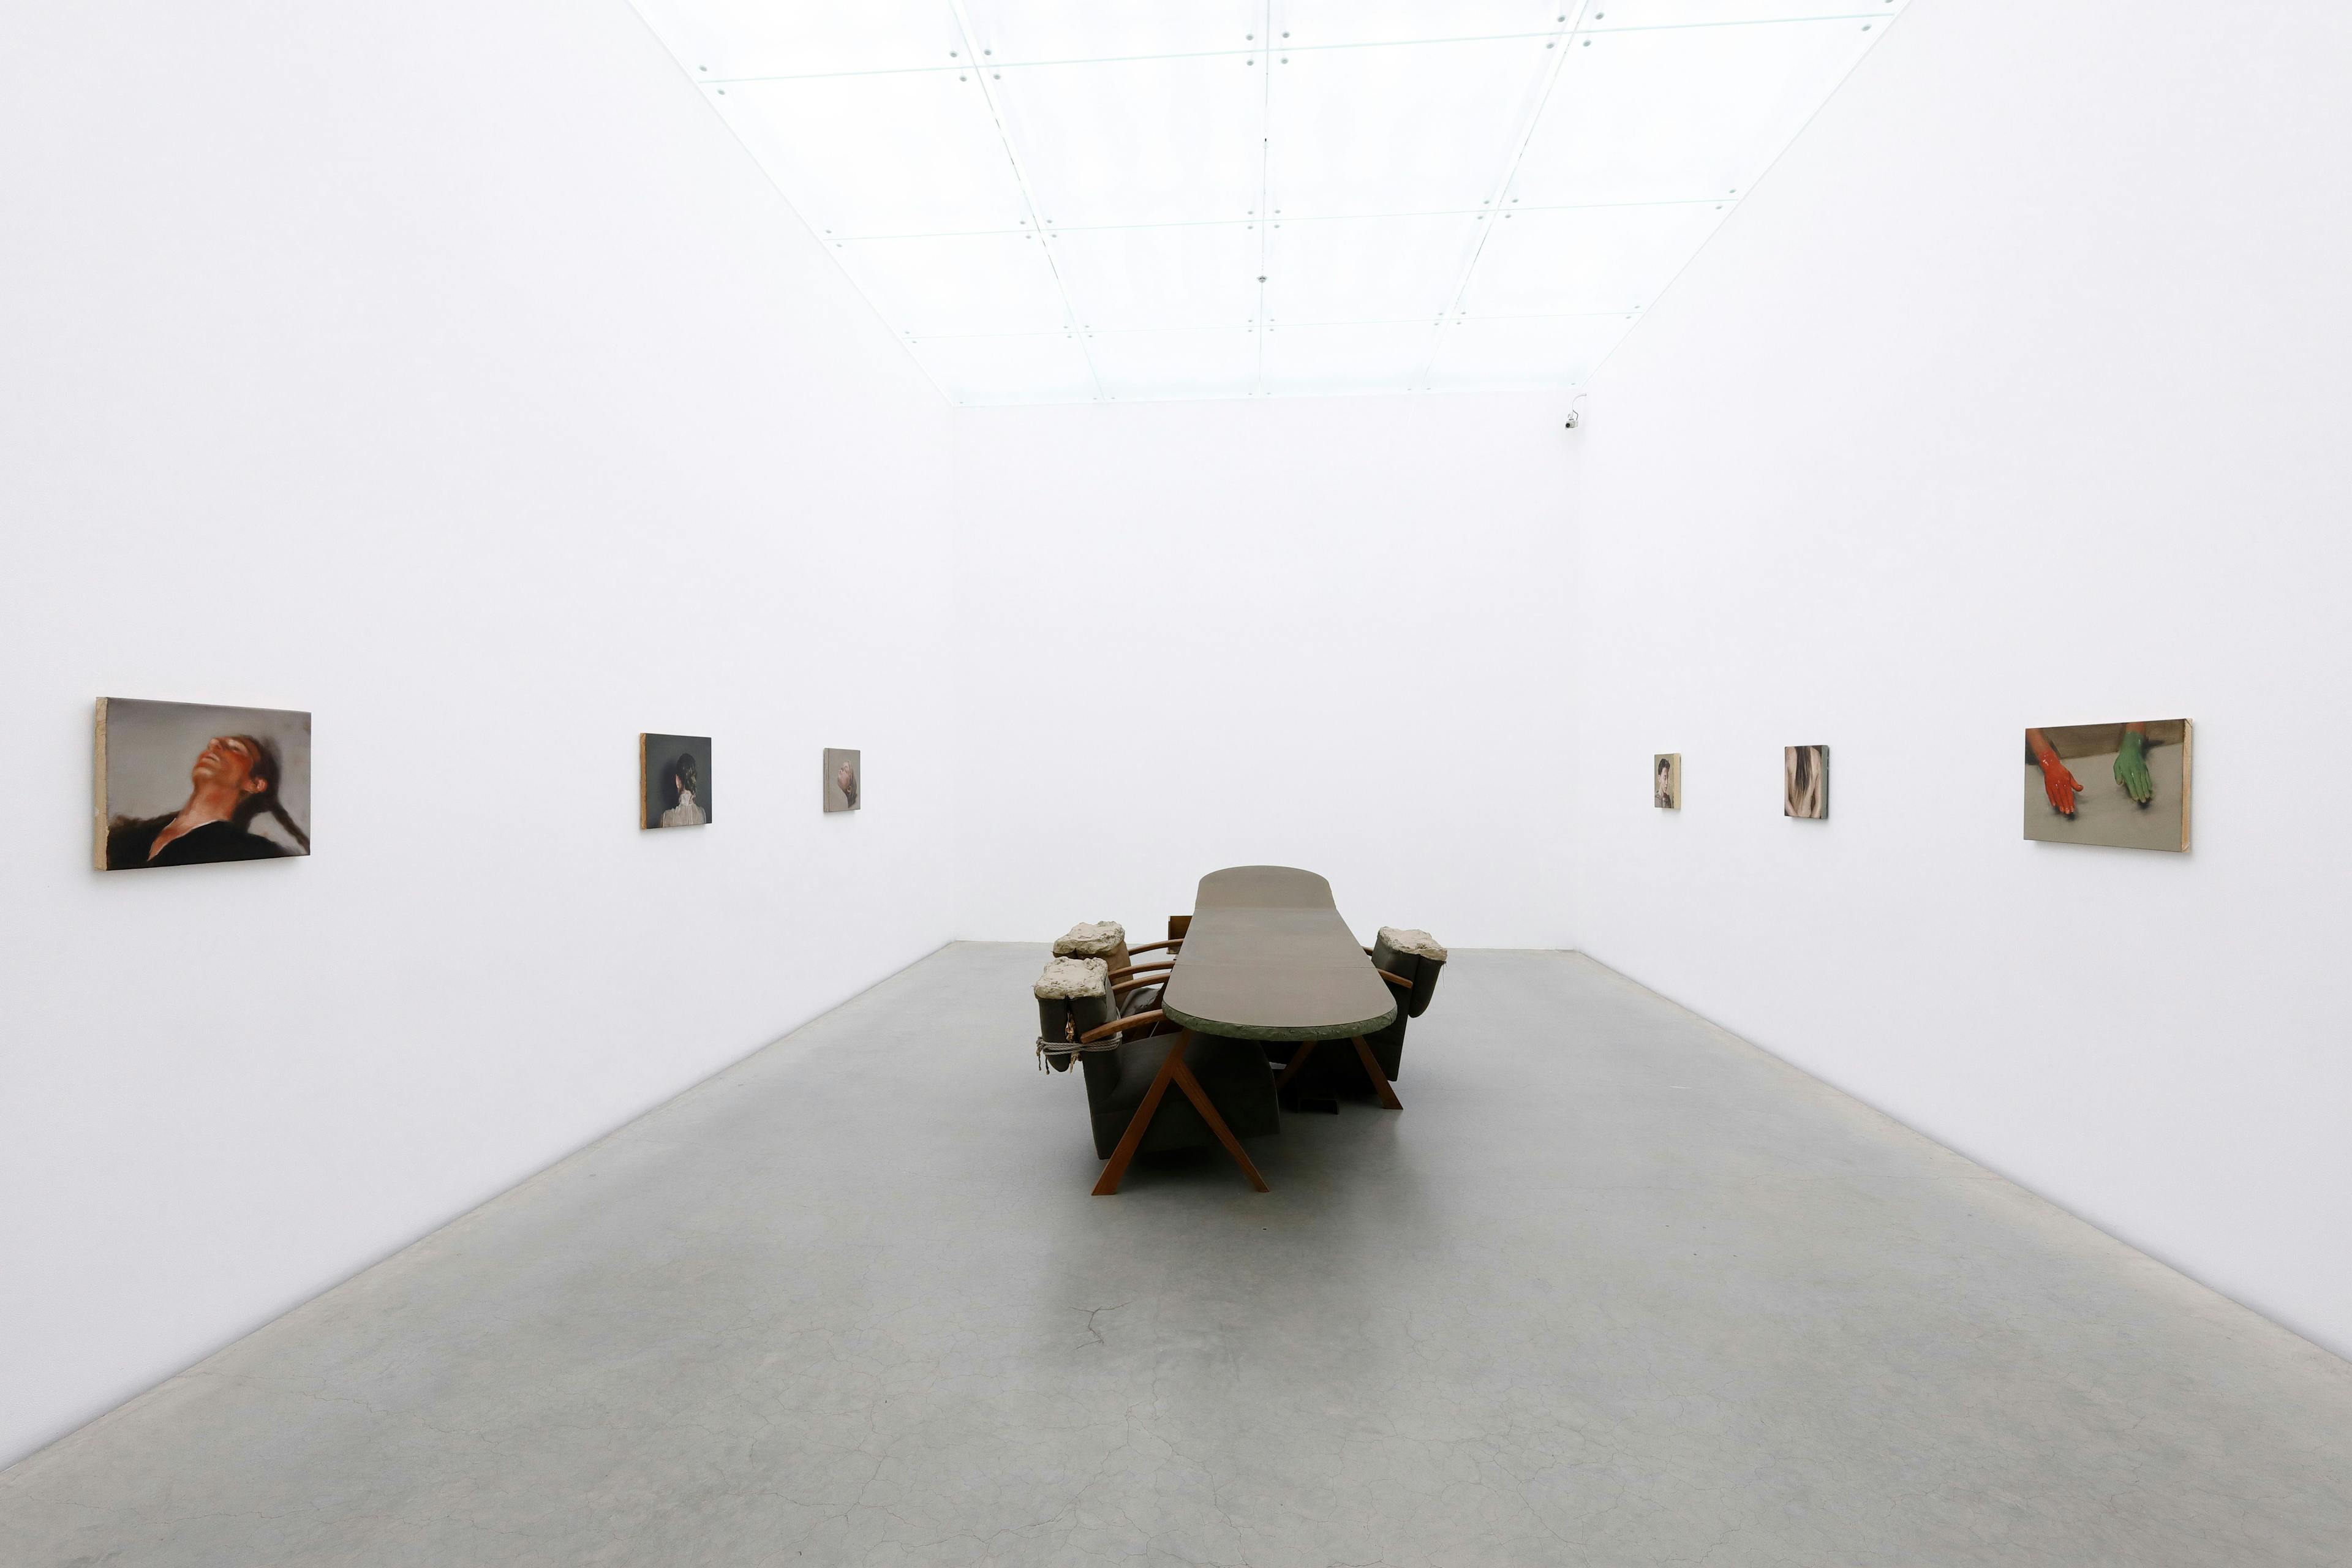 An installation view of an exhibition titled, MICHAËL BORREMANS MARK MANDERS: Double Silence, at 21st Century Museum of Contemporary Art in Kanazawa, dated 2020.